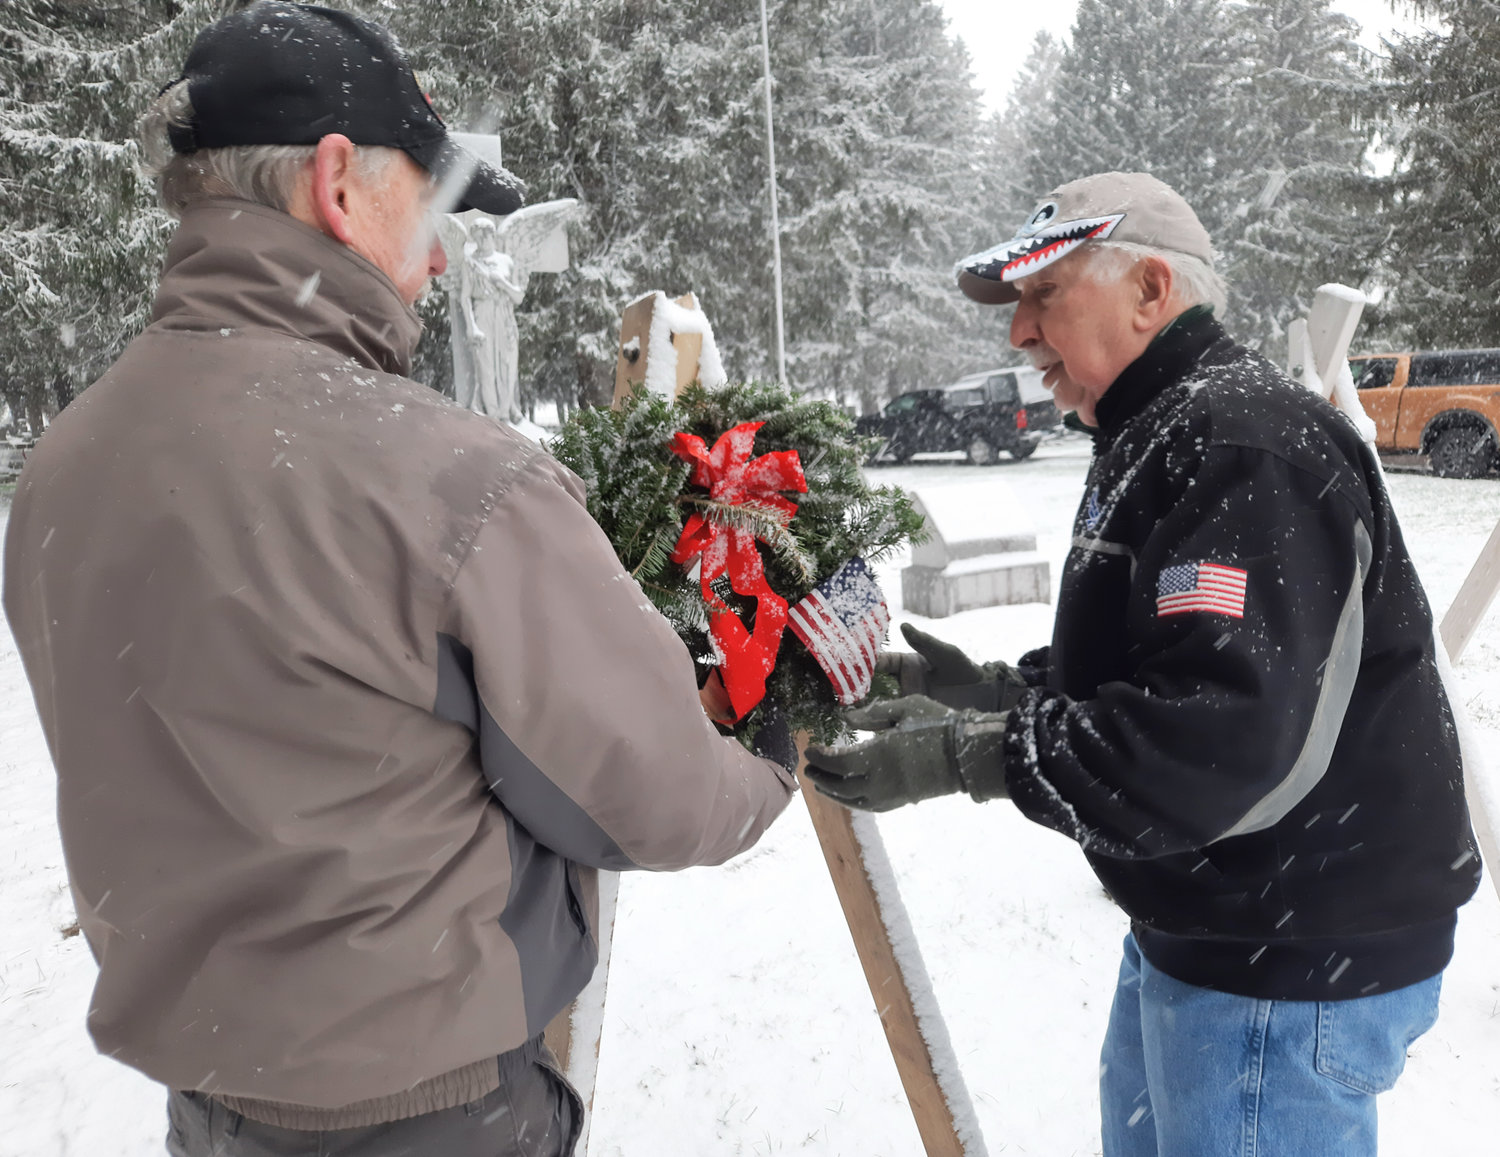 WREATHS ACROSS AMERICA — Members of the Lee American Legion place a wreath dedicated to the U.S. Army at Evergreen Cemetery in Lee. Wreaths Across America began in 1992 as a way to pay tribute to veterans across the country. In 2020, WAA and its volunteers laid over 1.7 million veterans' wreaths at more than 2,500 participating locations in all 50 U.S. states, at sea, and abroad.